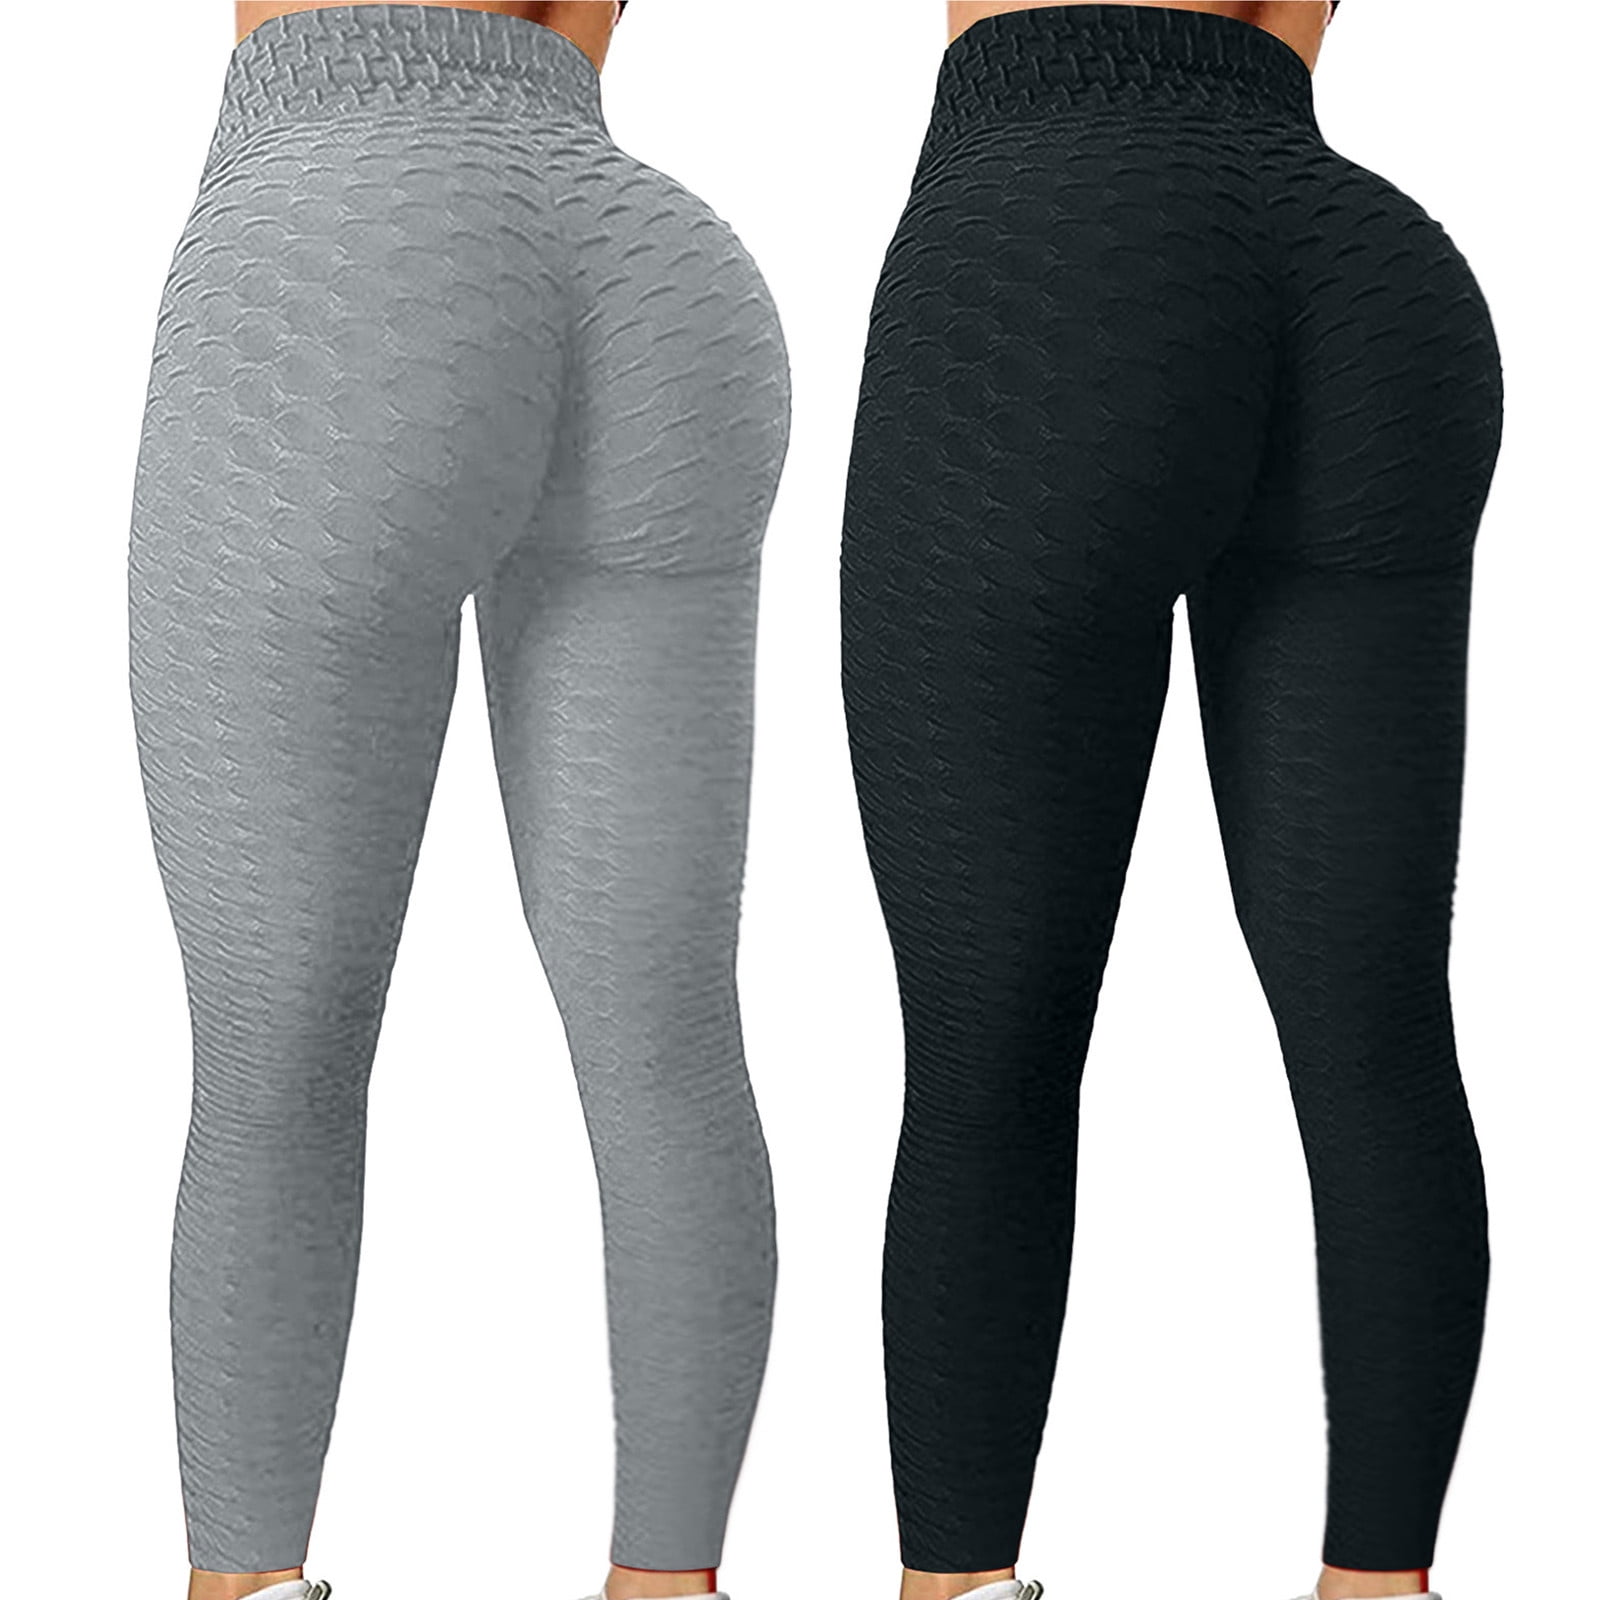 Deals of The Day!TopLLC Workout Leggings Womens Lady Strethcy Shiny Sport  Fitness Leggings Trouser Pants Bottoms Trousers Jogging Pants Tummy Control  Yoga Pants on Clearance 